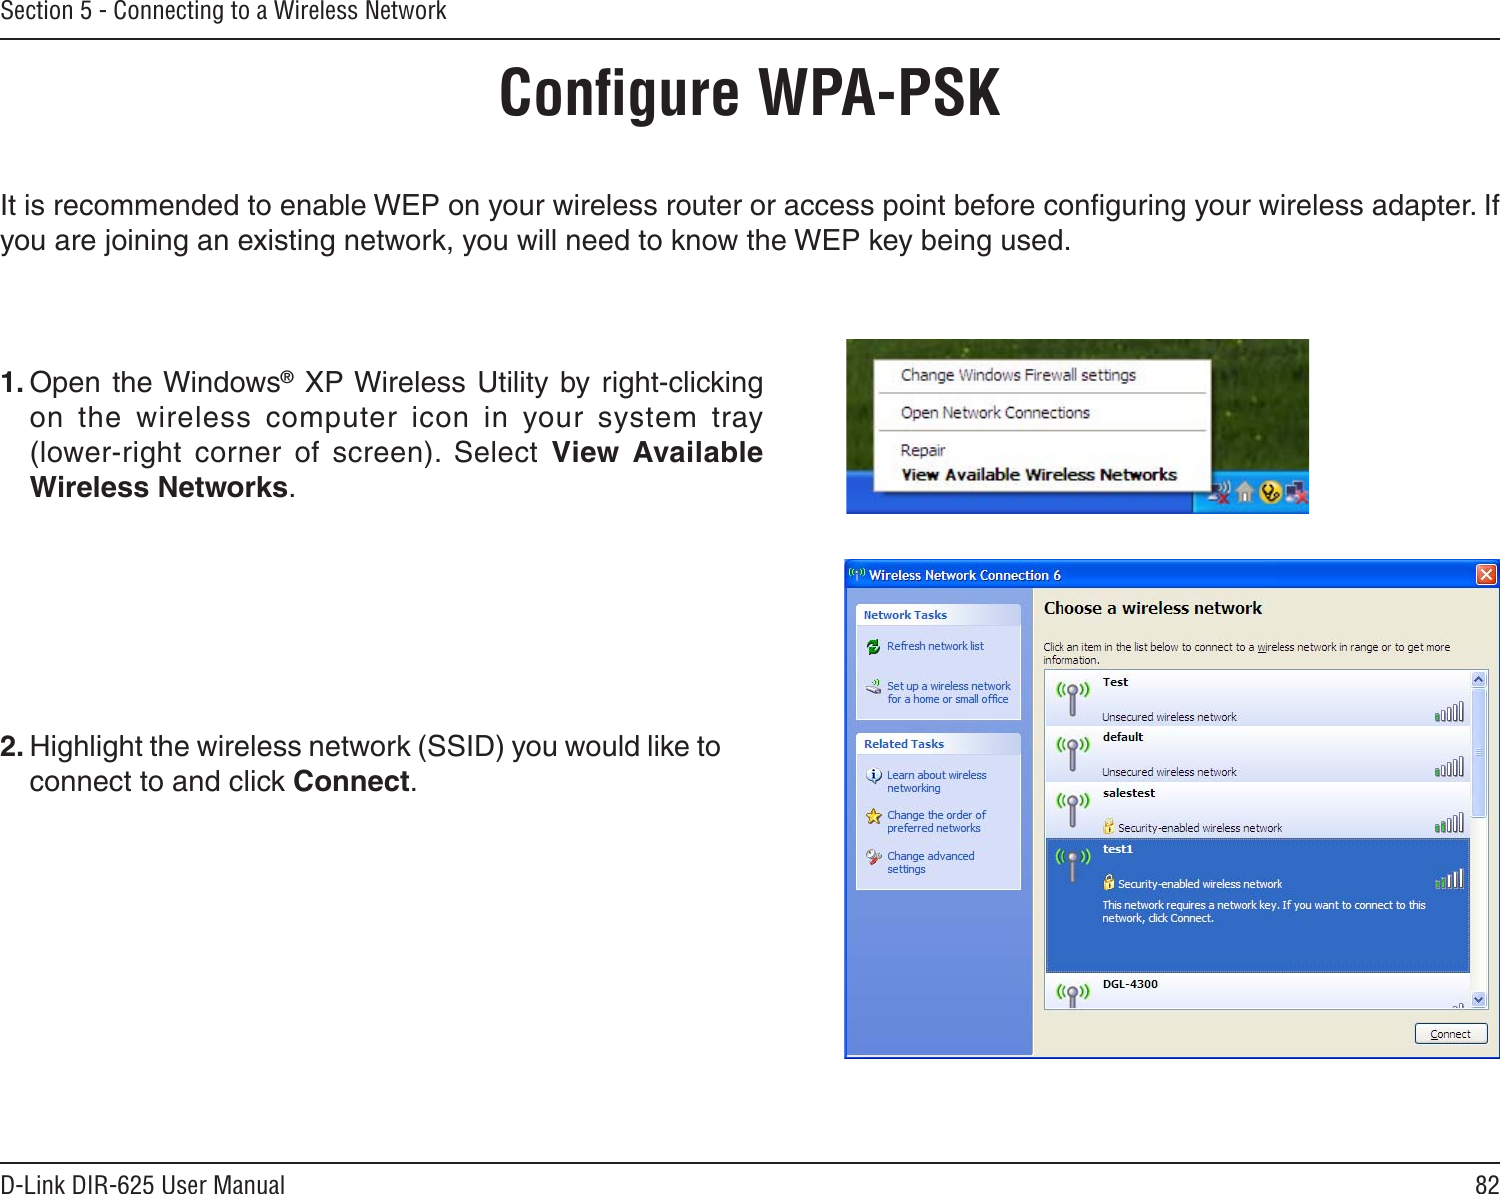 82D-Link DIR-625 User ManualSection 5 - Connecting to a Wireless NetworkConﬁgure WPA-PSKIt is recommended to enable WEP on your wireless router or access point before conﬁguring your wireless adapter. If you are joining an existing network, you will need to know the WEP key being used.2. Highlight the wireless network (SSID) you would like to connect to and click Connect.1. Open  the Windows® XP Wireless  Utility  by right-clicking on  the  wireless  computer  icon  in  your  system  tray  (lower-right  corner  of  screen).  Select  View  Available Wireless Networks. 